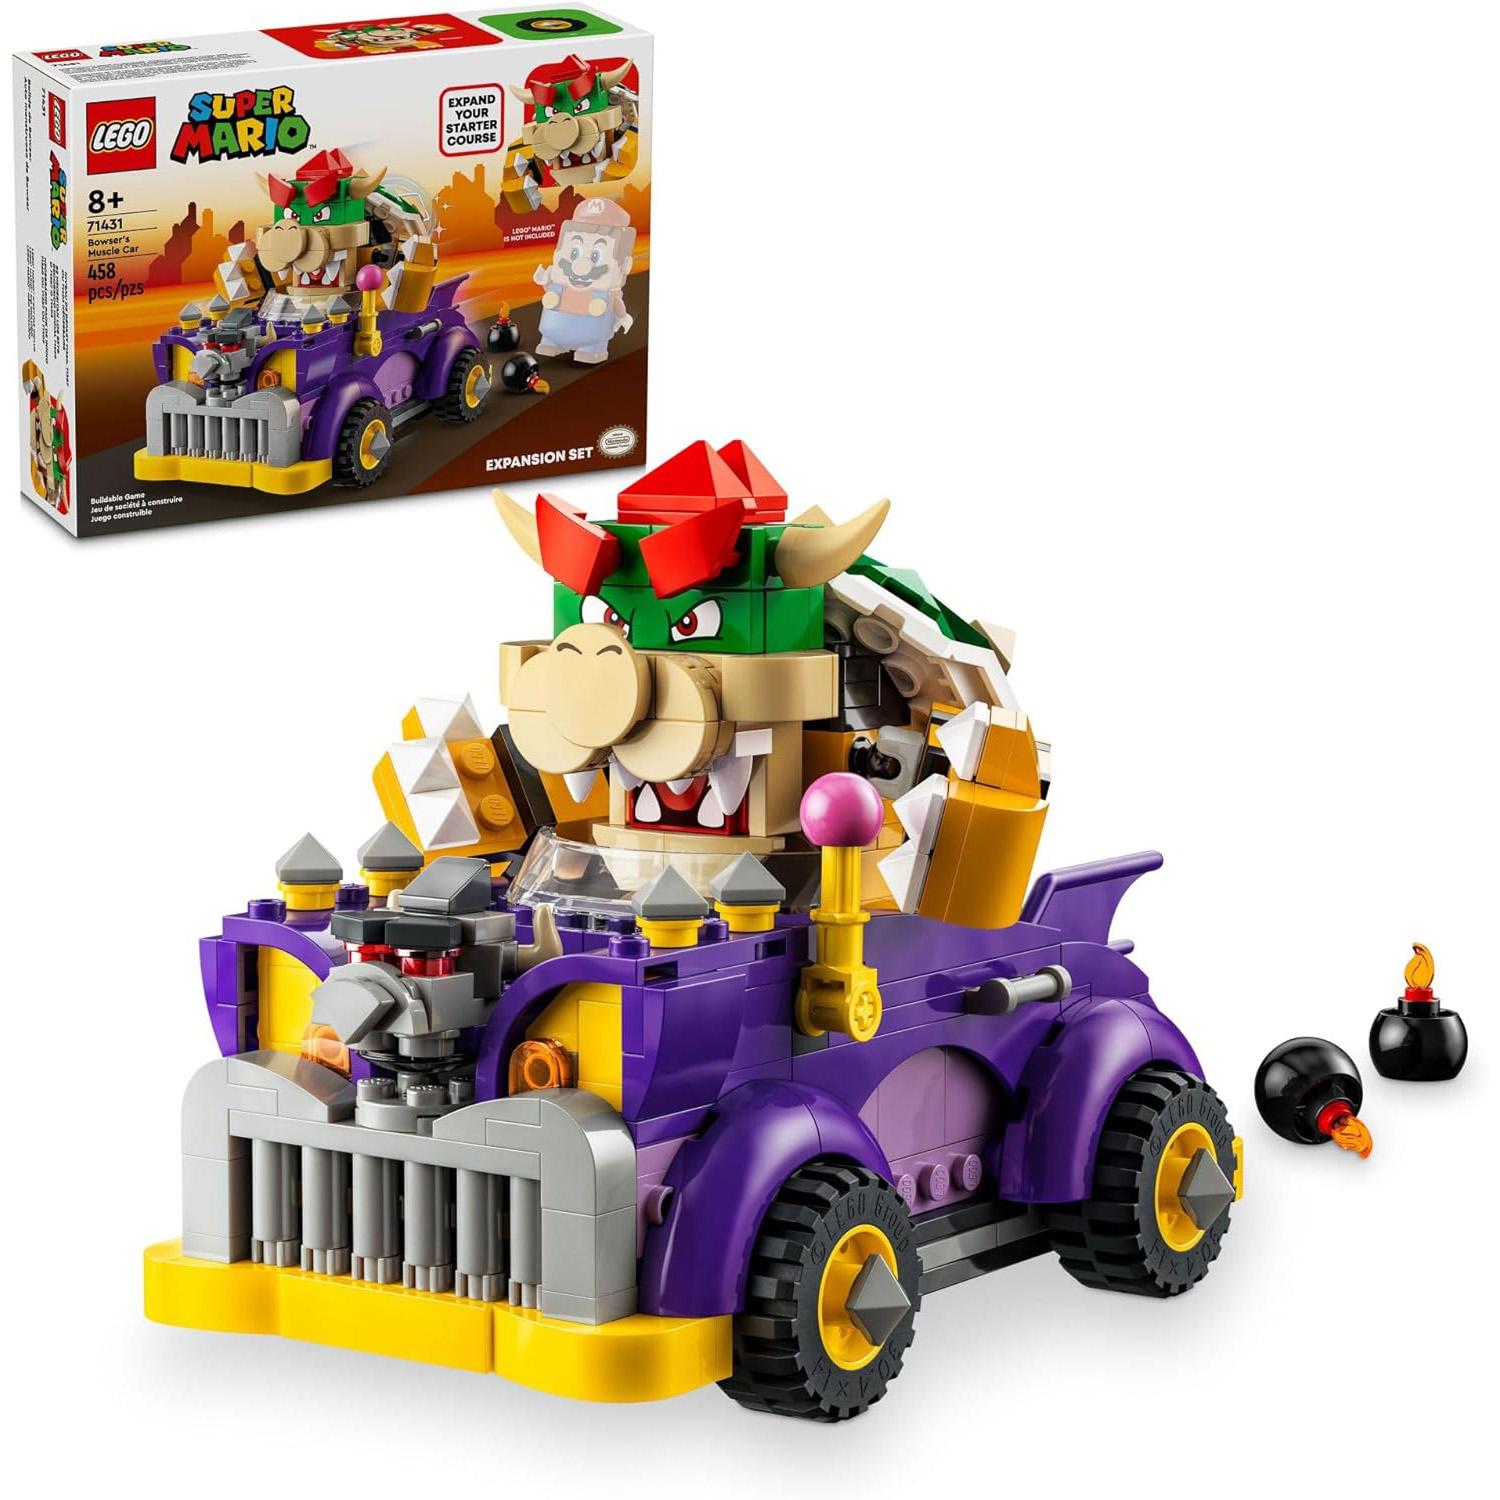 LEGO Super Mario Bowser's Muscle Car Expansion Set 71431 for $23.99